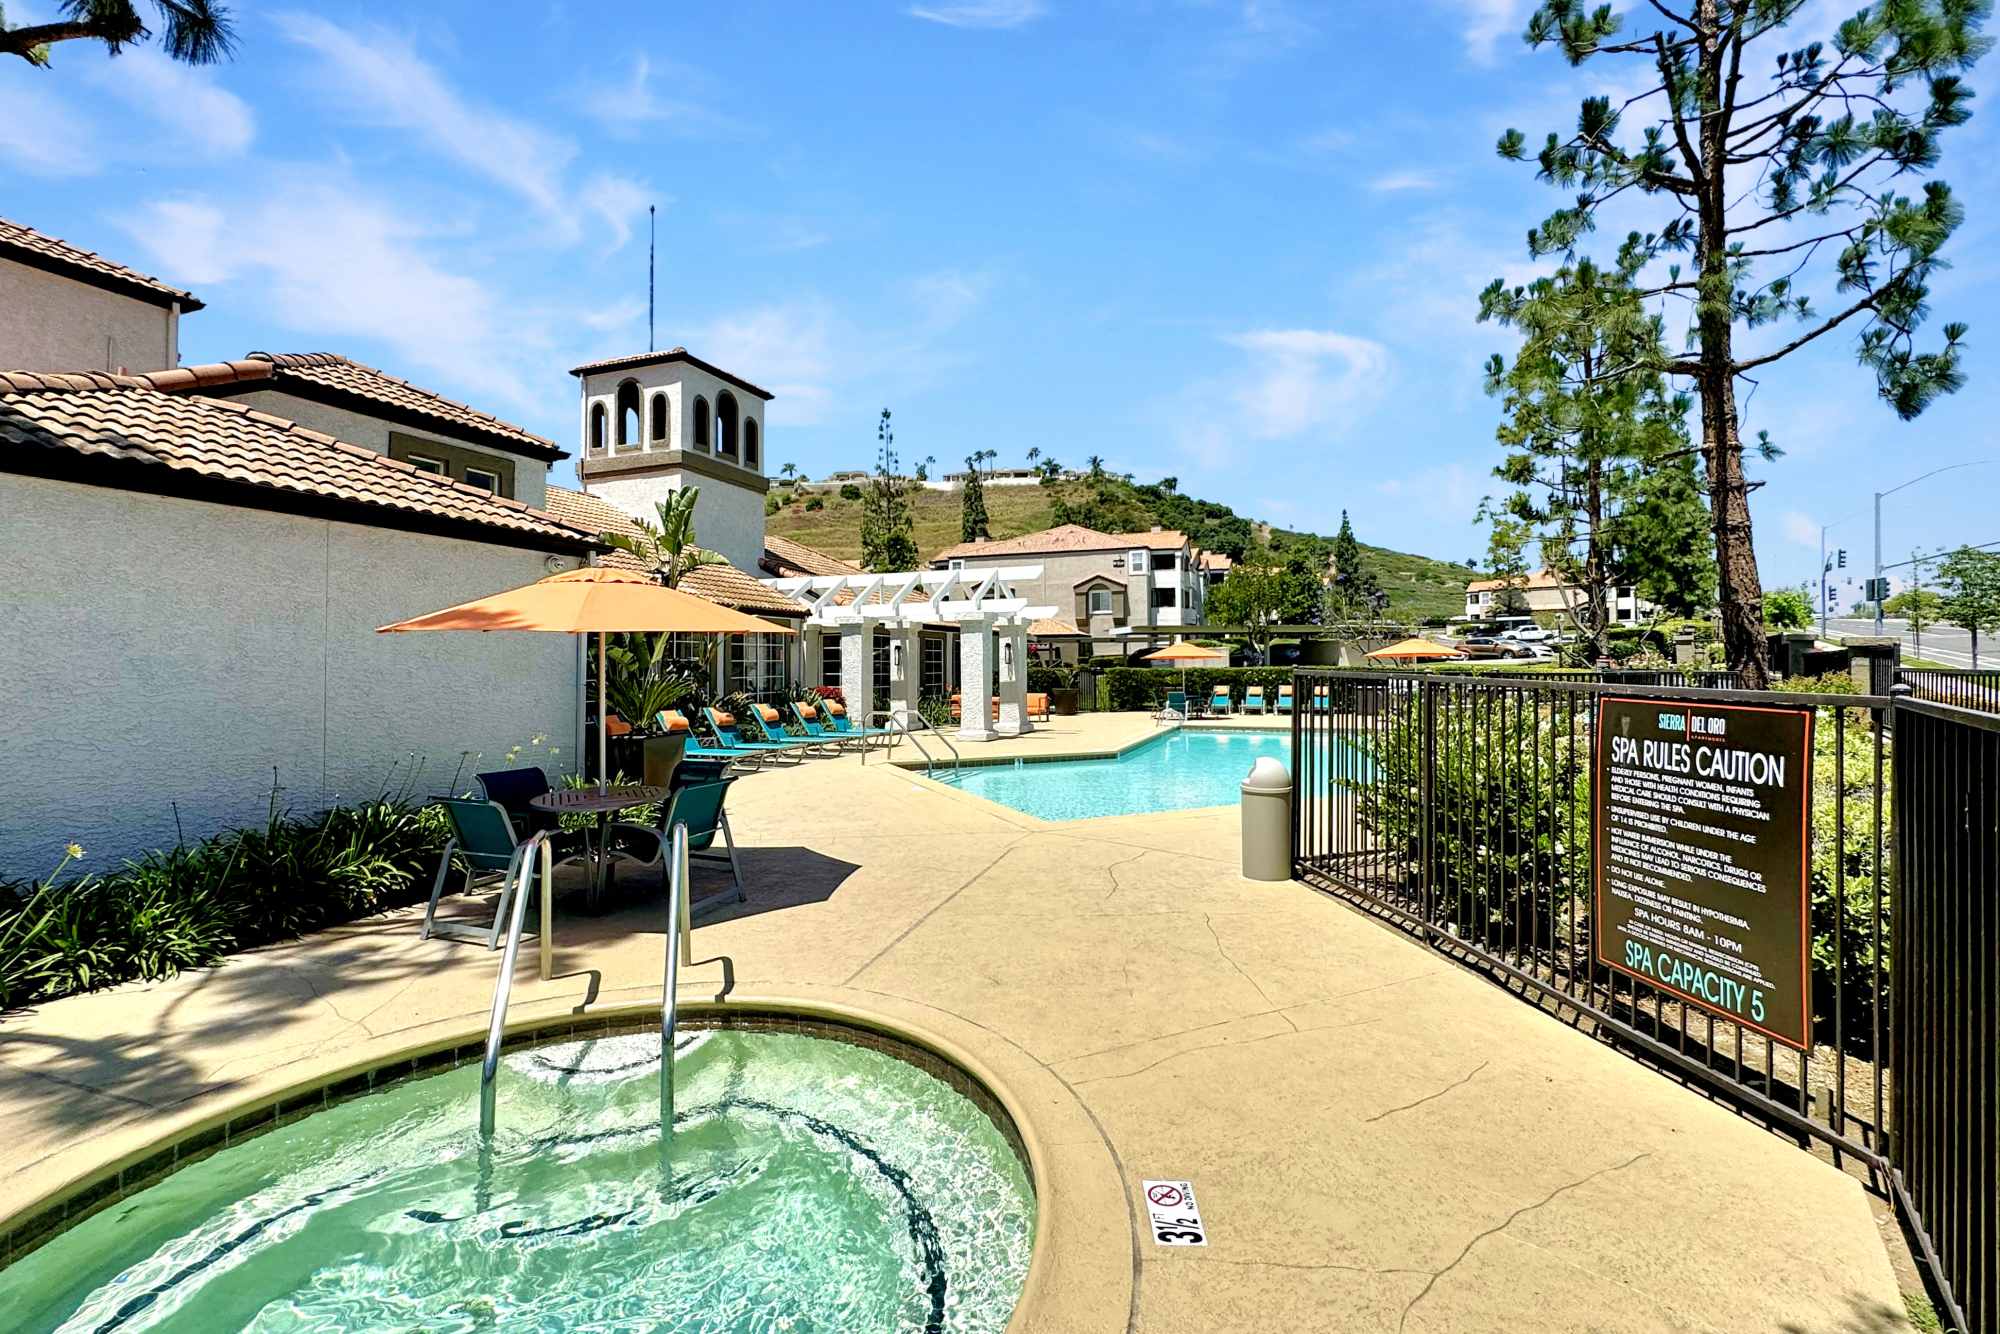 Pool with lounge chairs and umbrellas at Sierra Del Oro Apartments in Corona, California